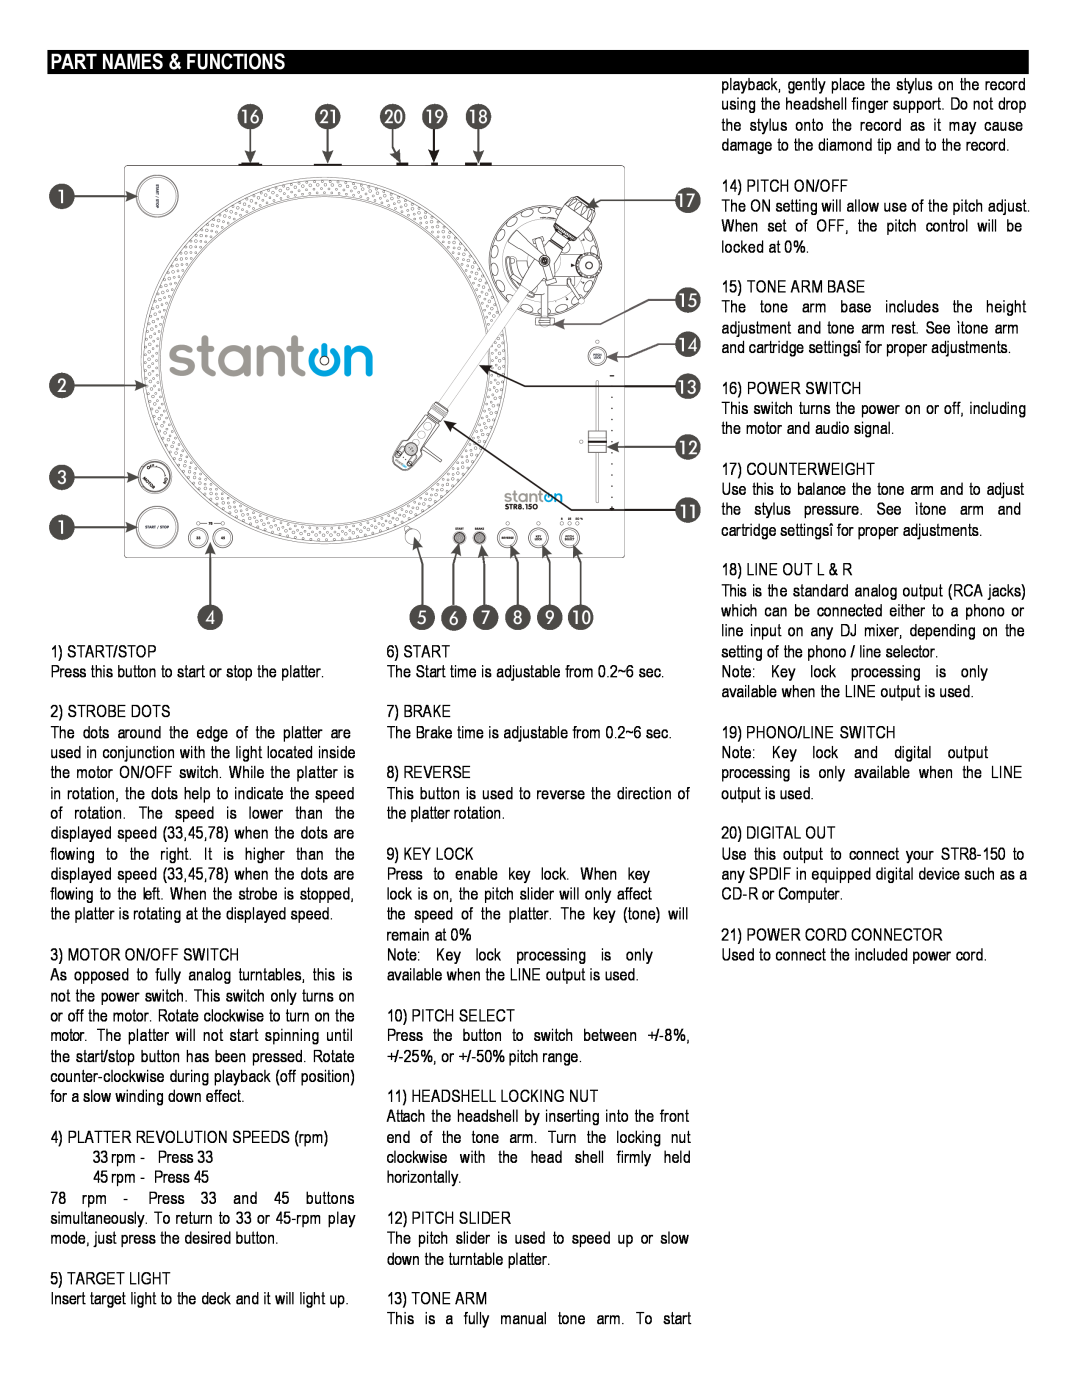 Stanton STR8-150 owner manual playback, gently place the stylus on the record, 5 6 